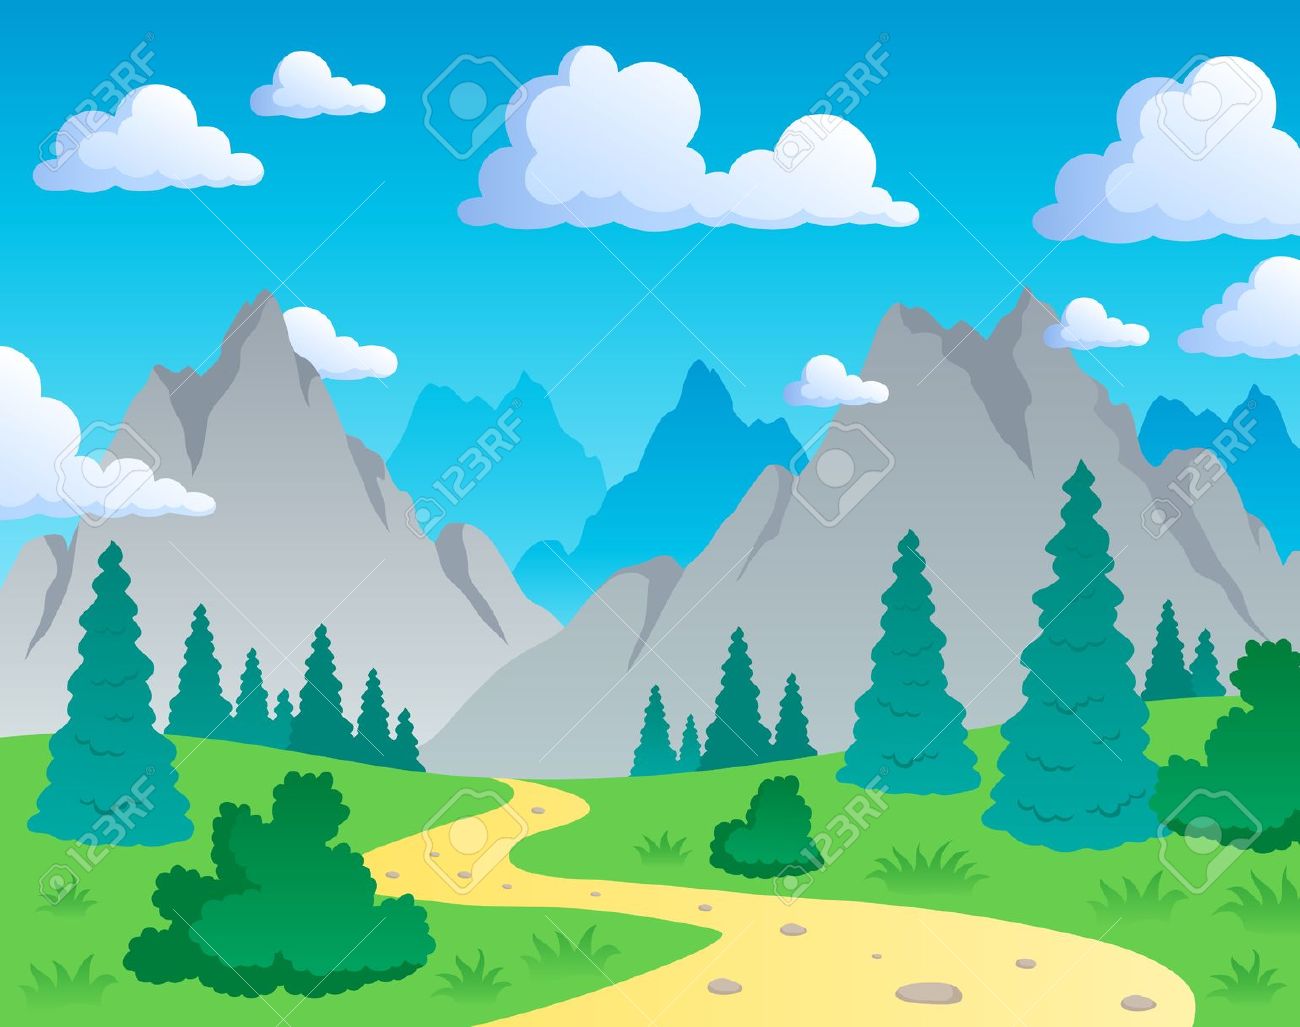 Mountains and valleys clipart.